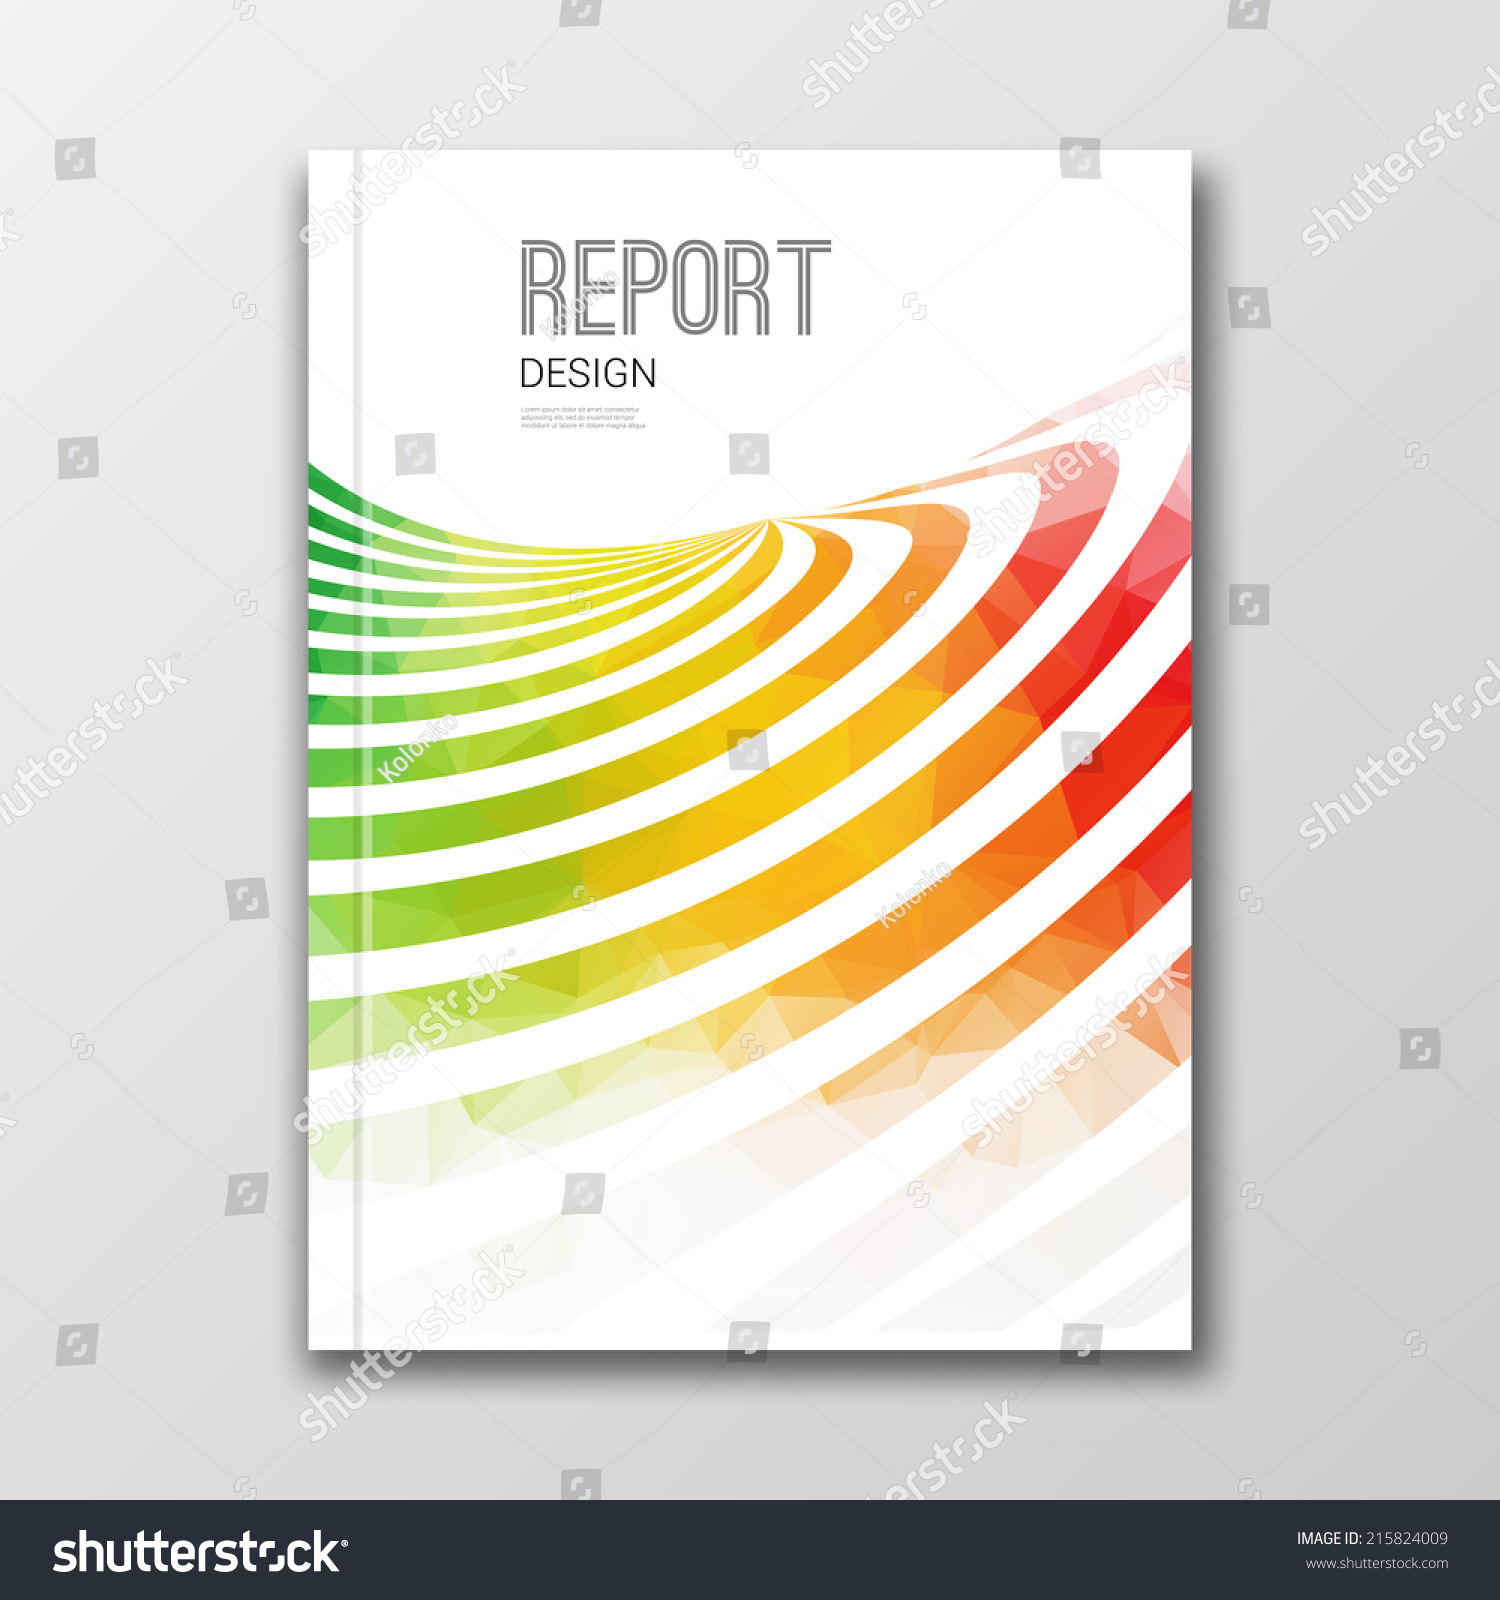 Layout of book report